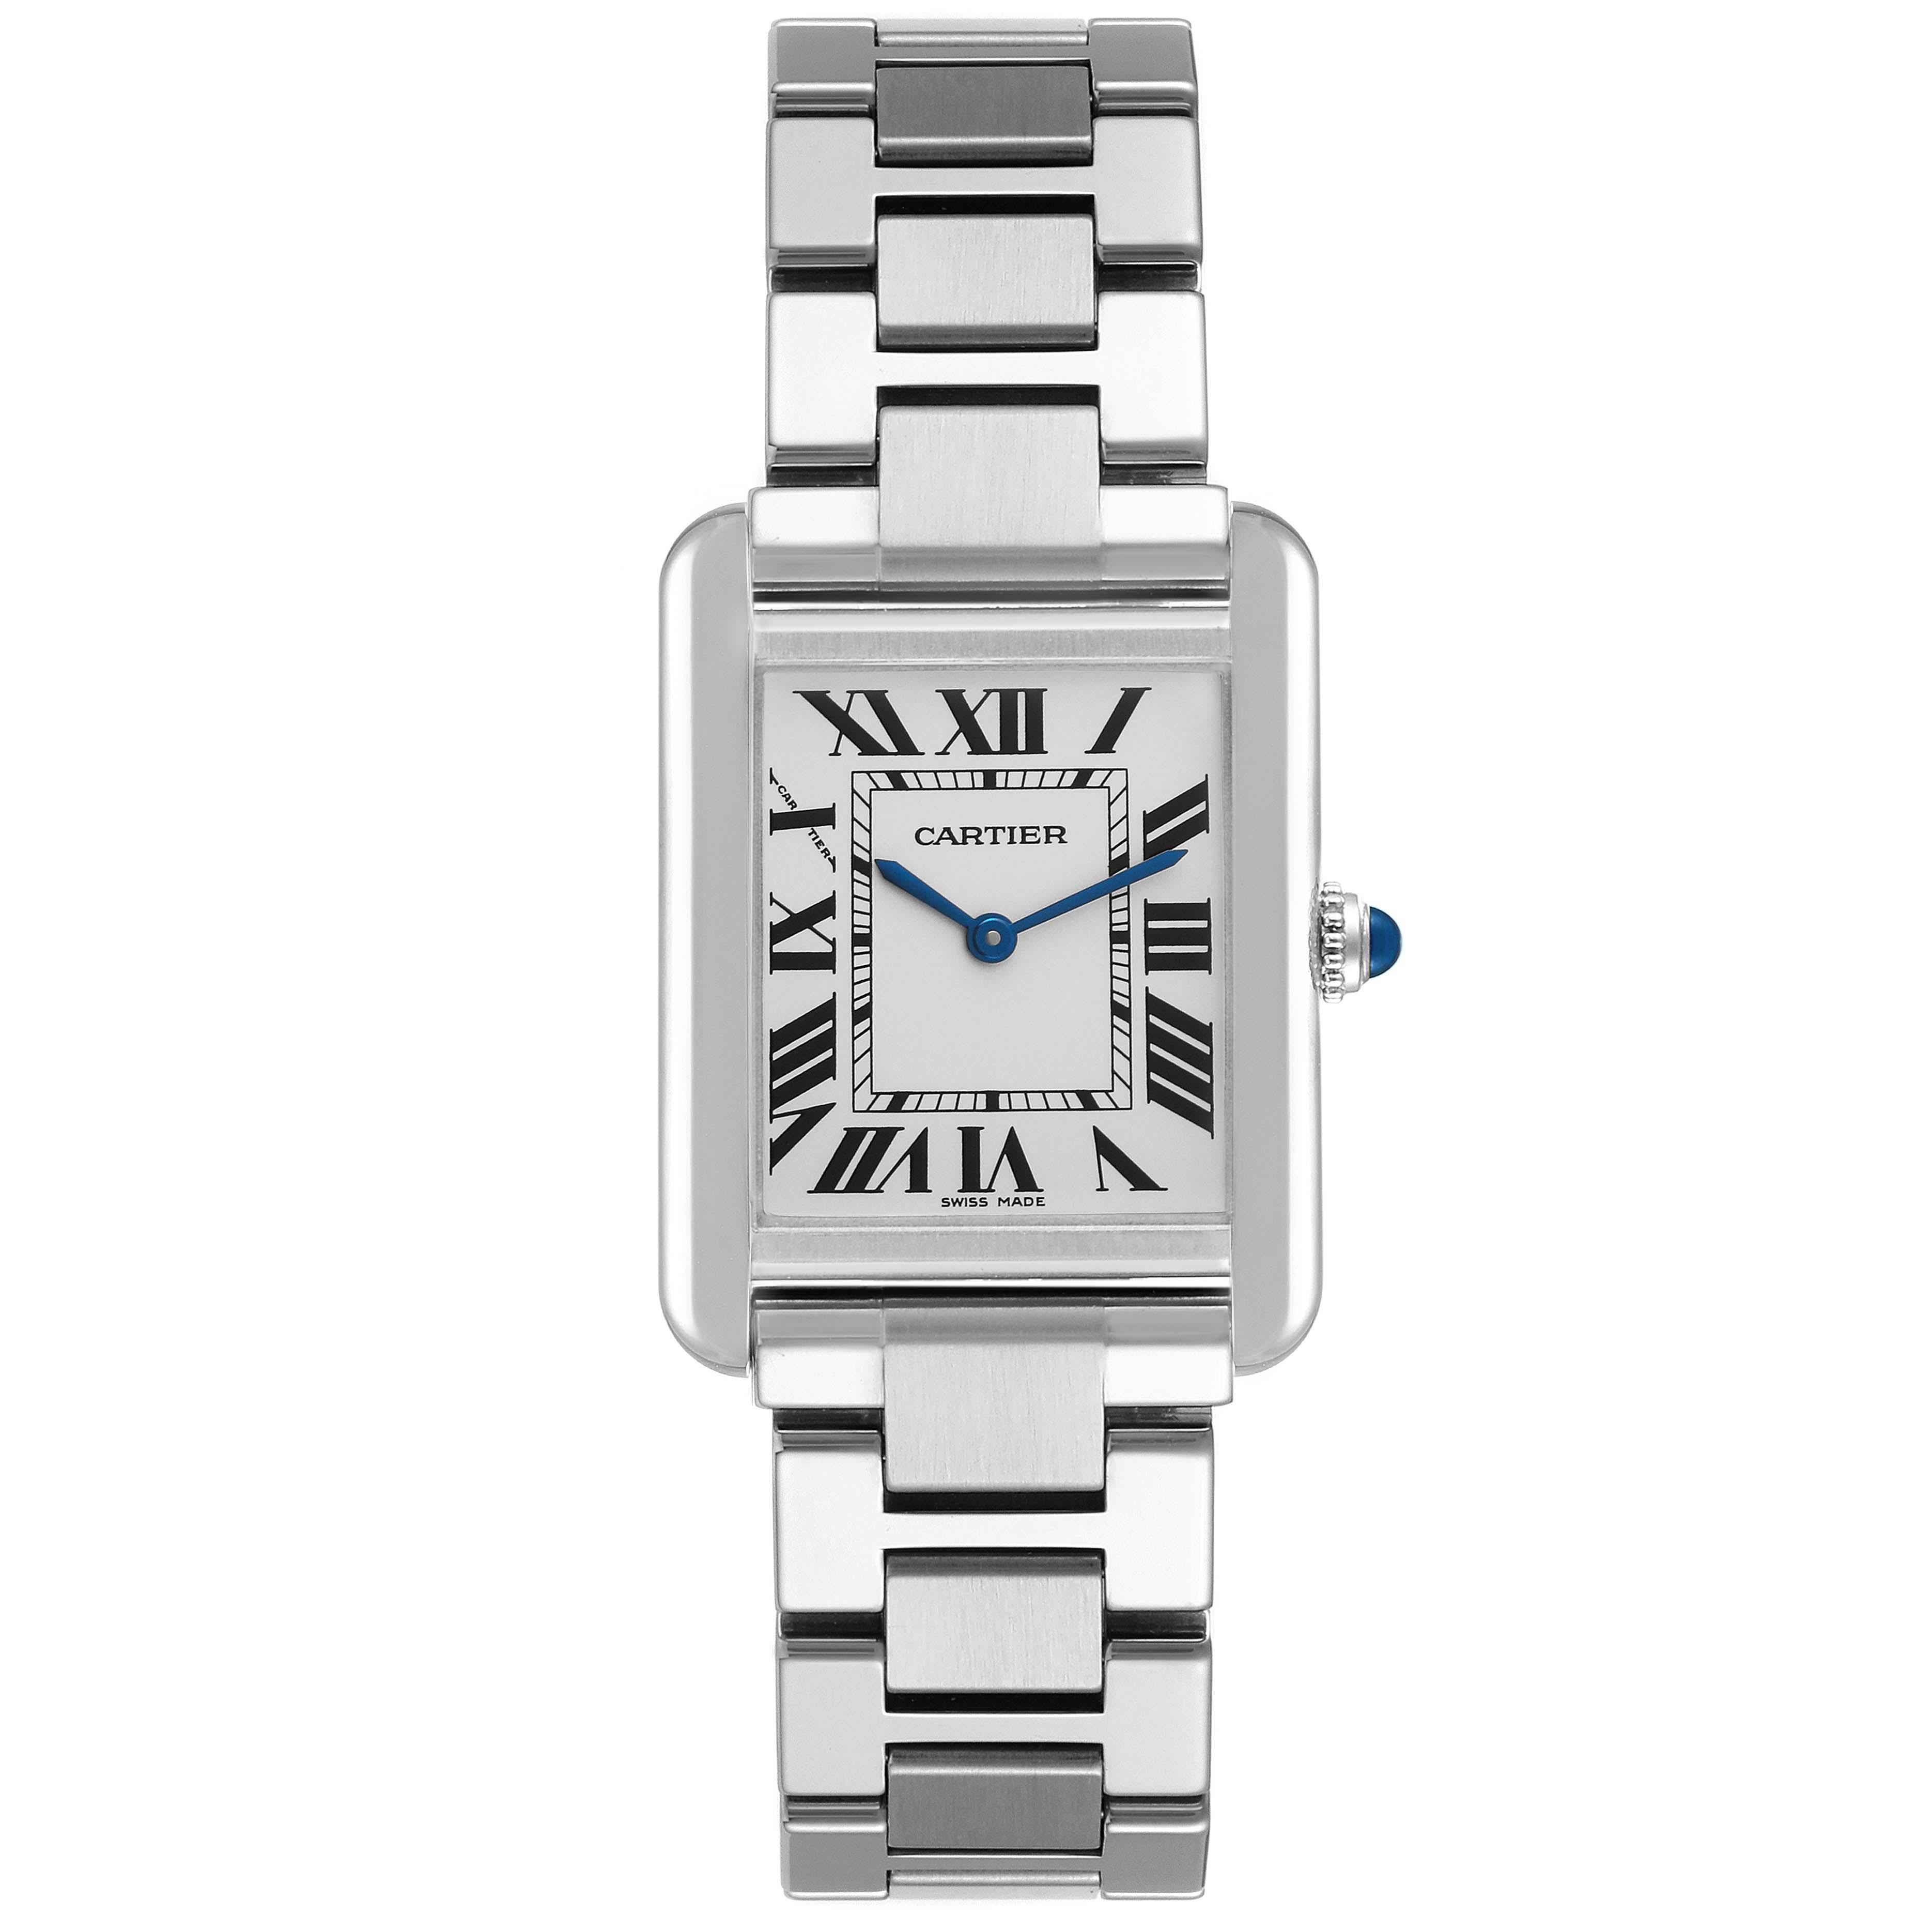 Cartier Tank Solo Small Silver Dial Steel Ladies Watch W5200013 Box Papers. Quartz movement. Stainless steel case 31 x 24 mm. Circular grained crown set with a blue spinel cabochon. . Scratch resistant sapphire crystal. Silver opaline dial with